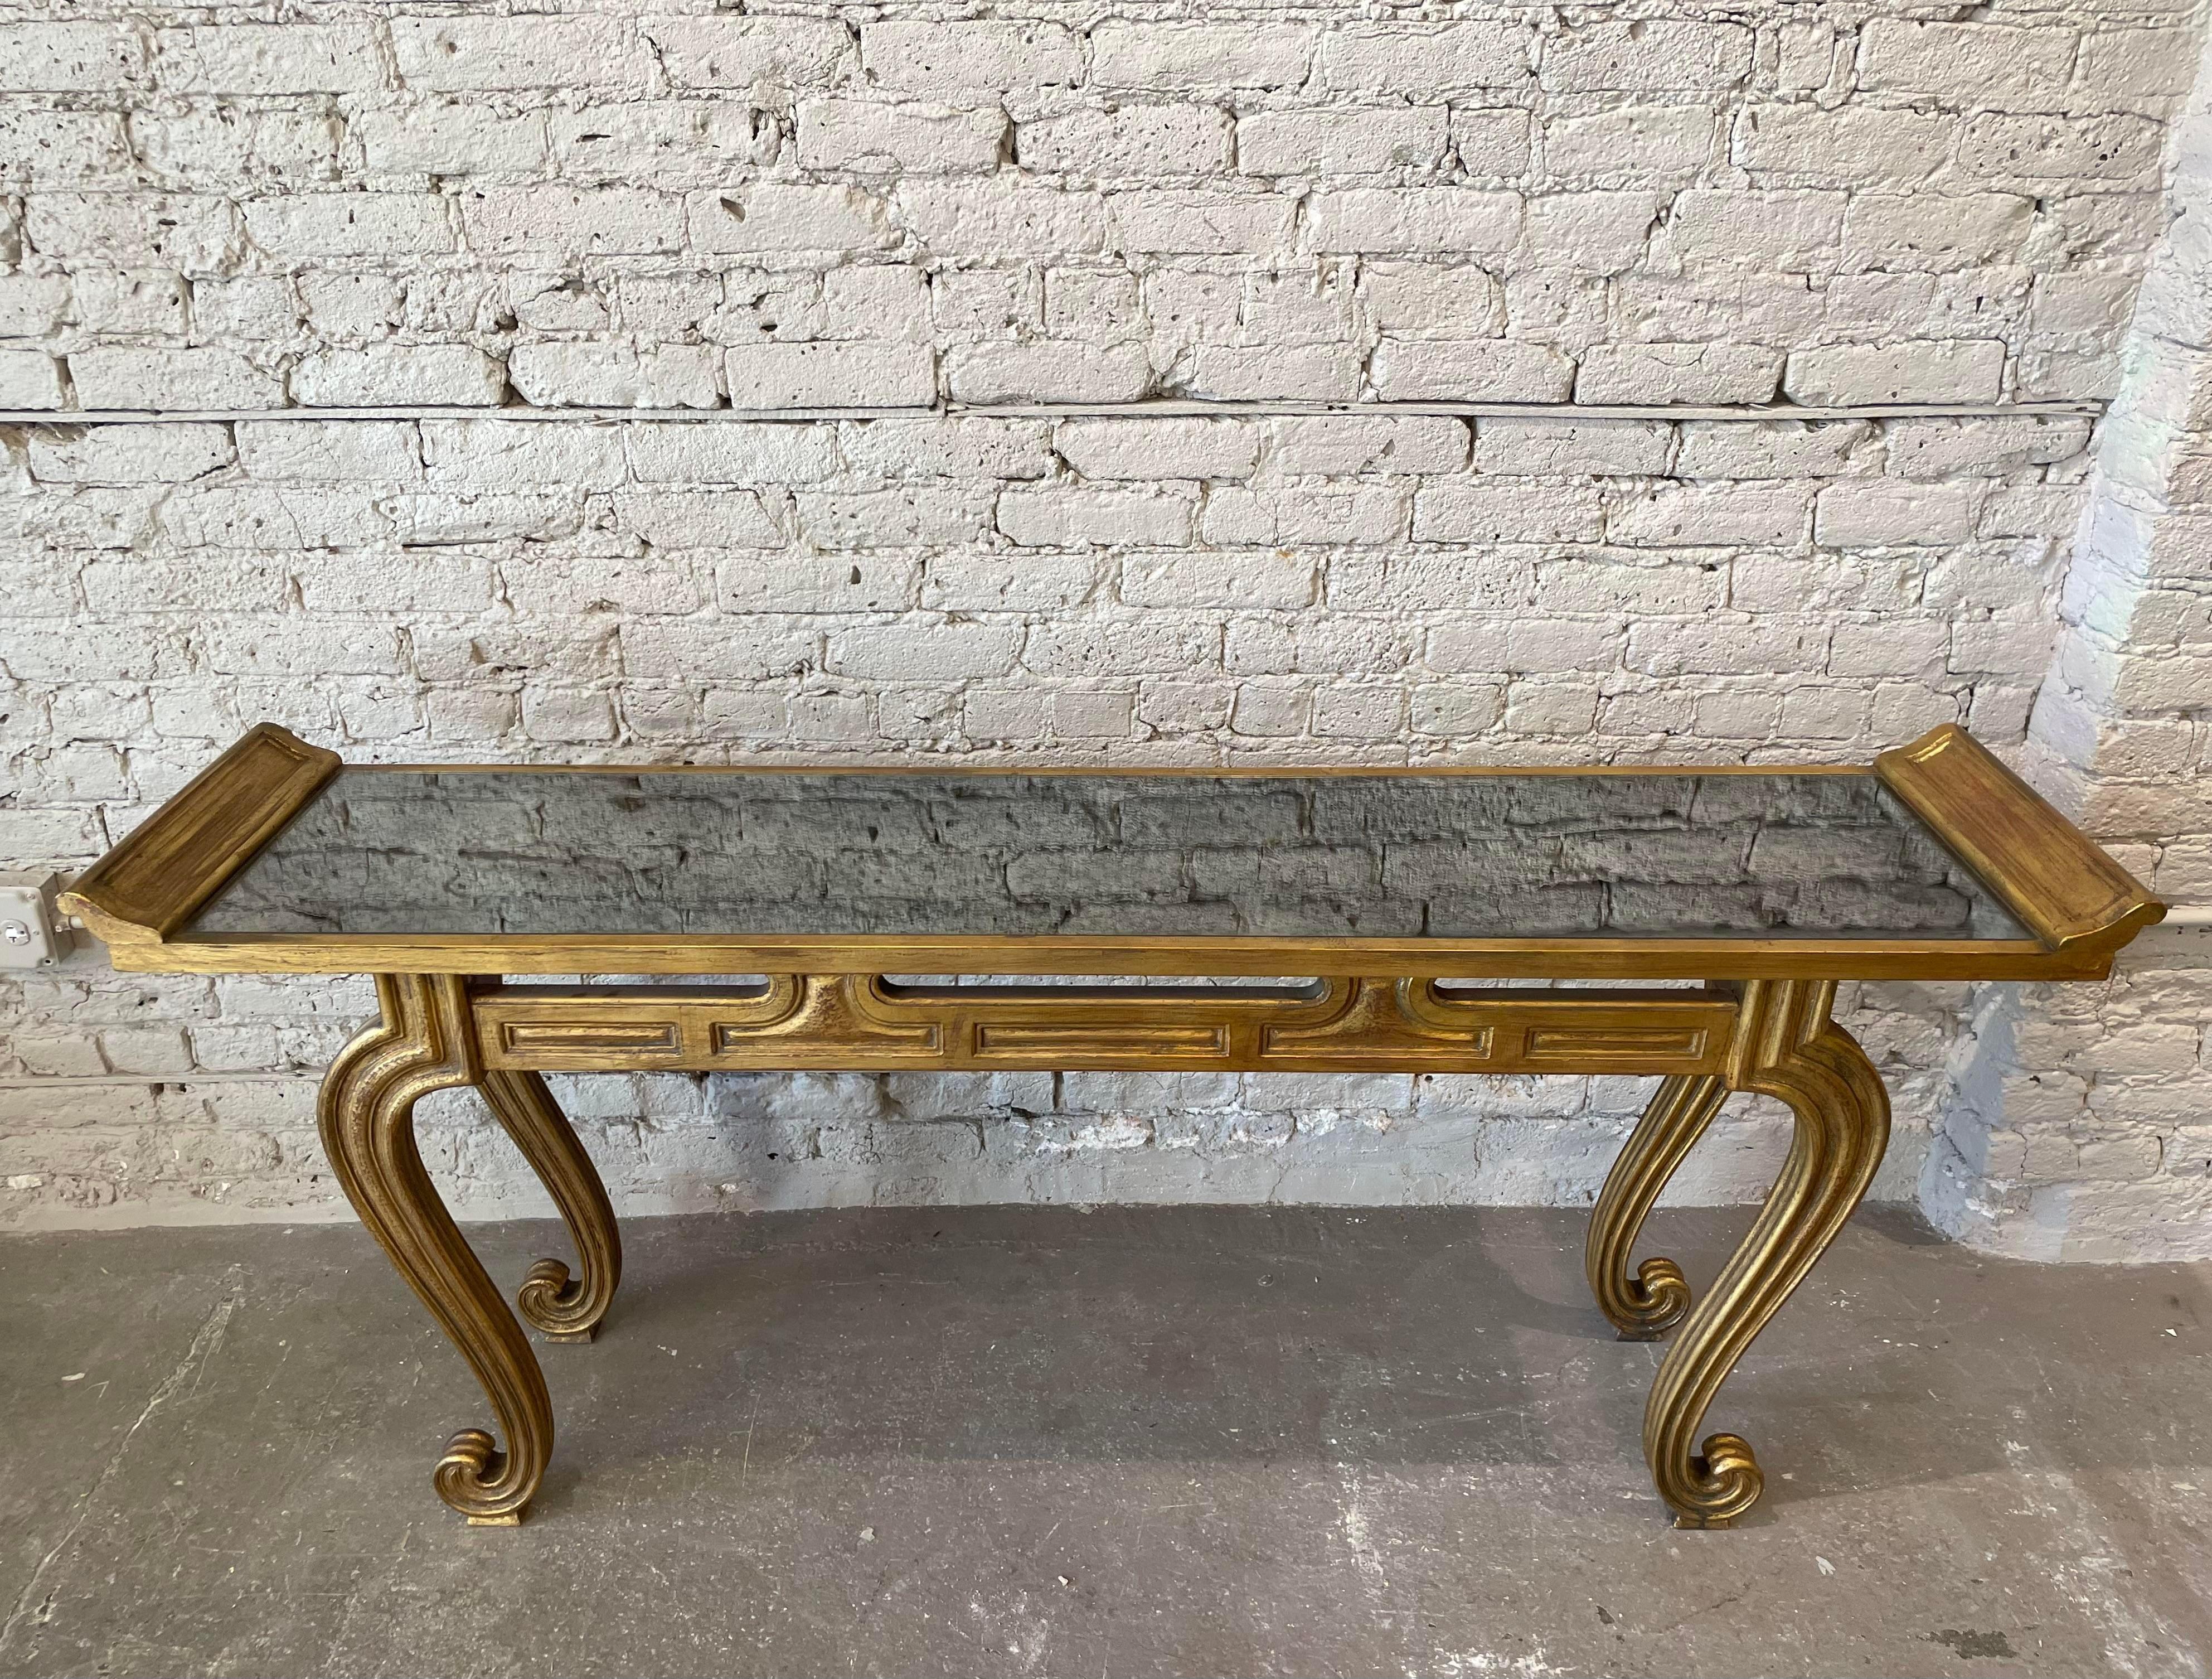 This console table is a 1950s interpretation of the altar tables traditionally found in Chinese reception halls. The gilt-painted wood frame features the typical everted flanges and scrolled legs; the table surface is gold-specked mirror. The height